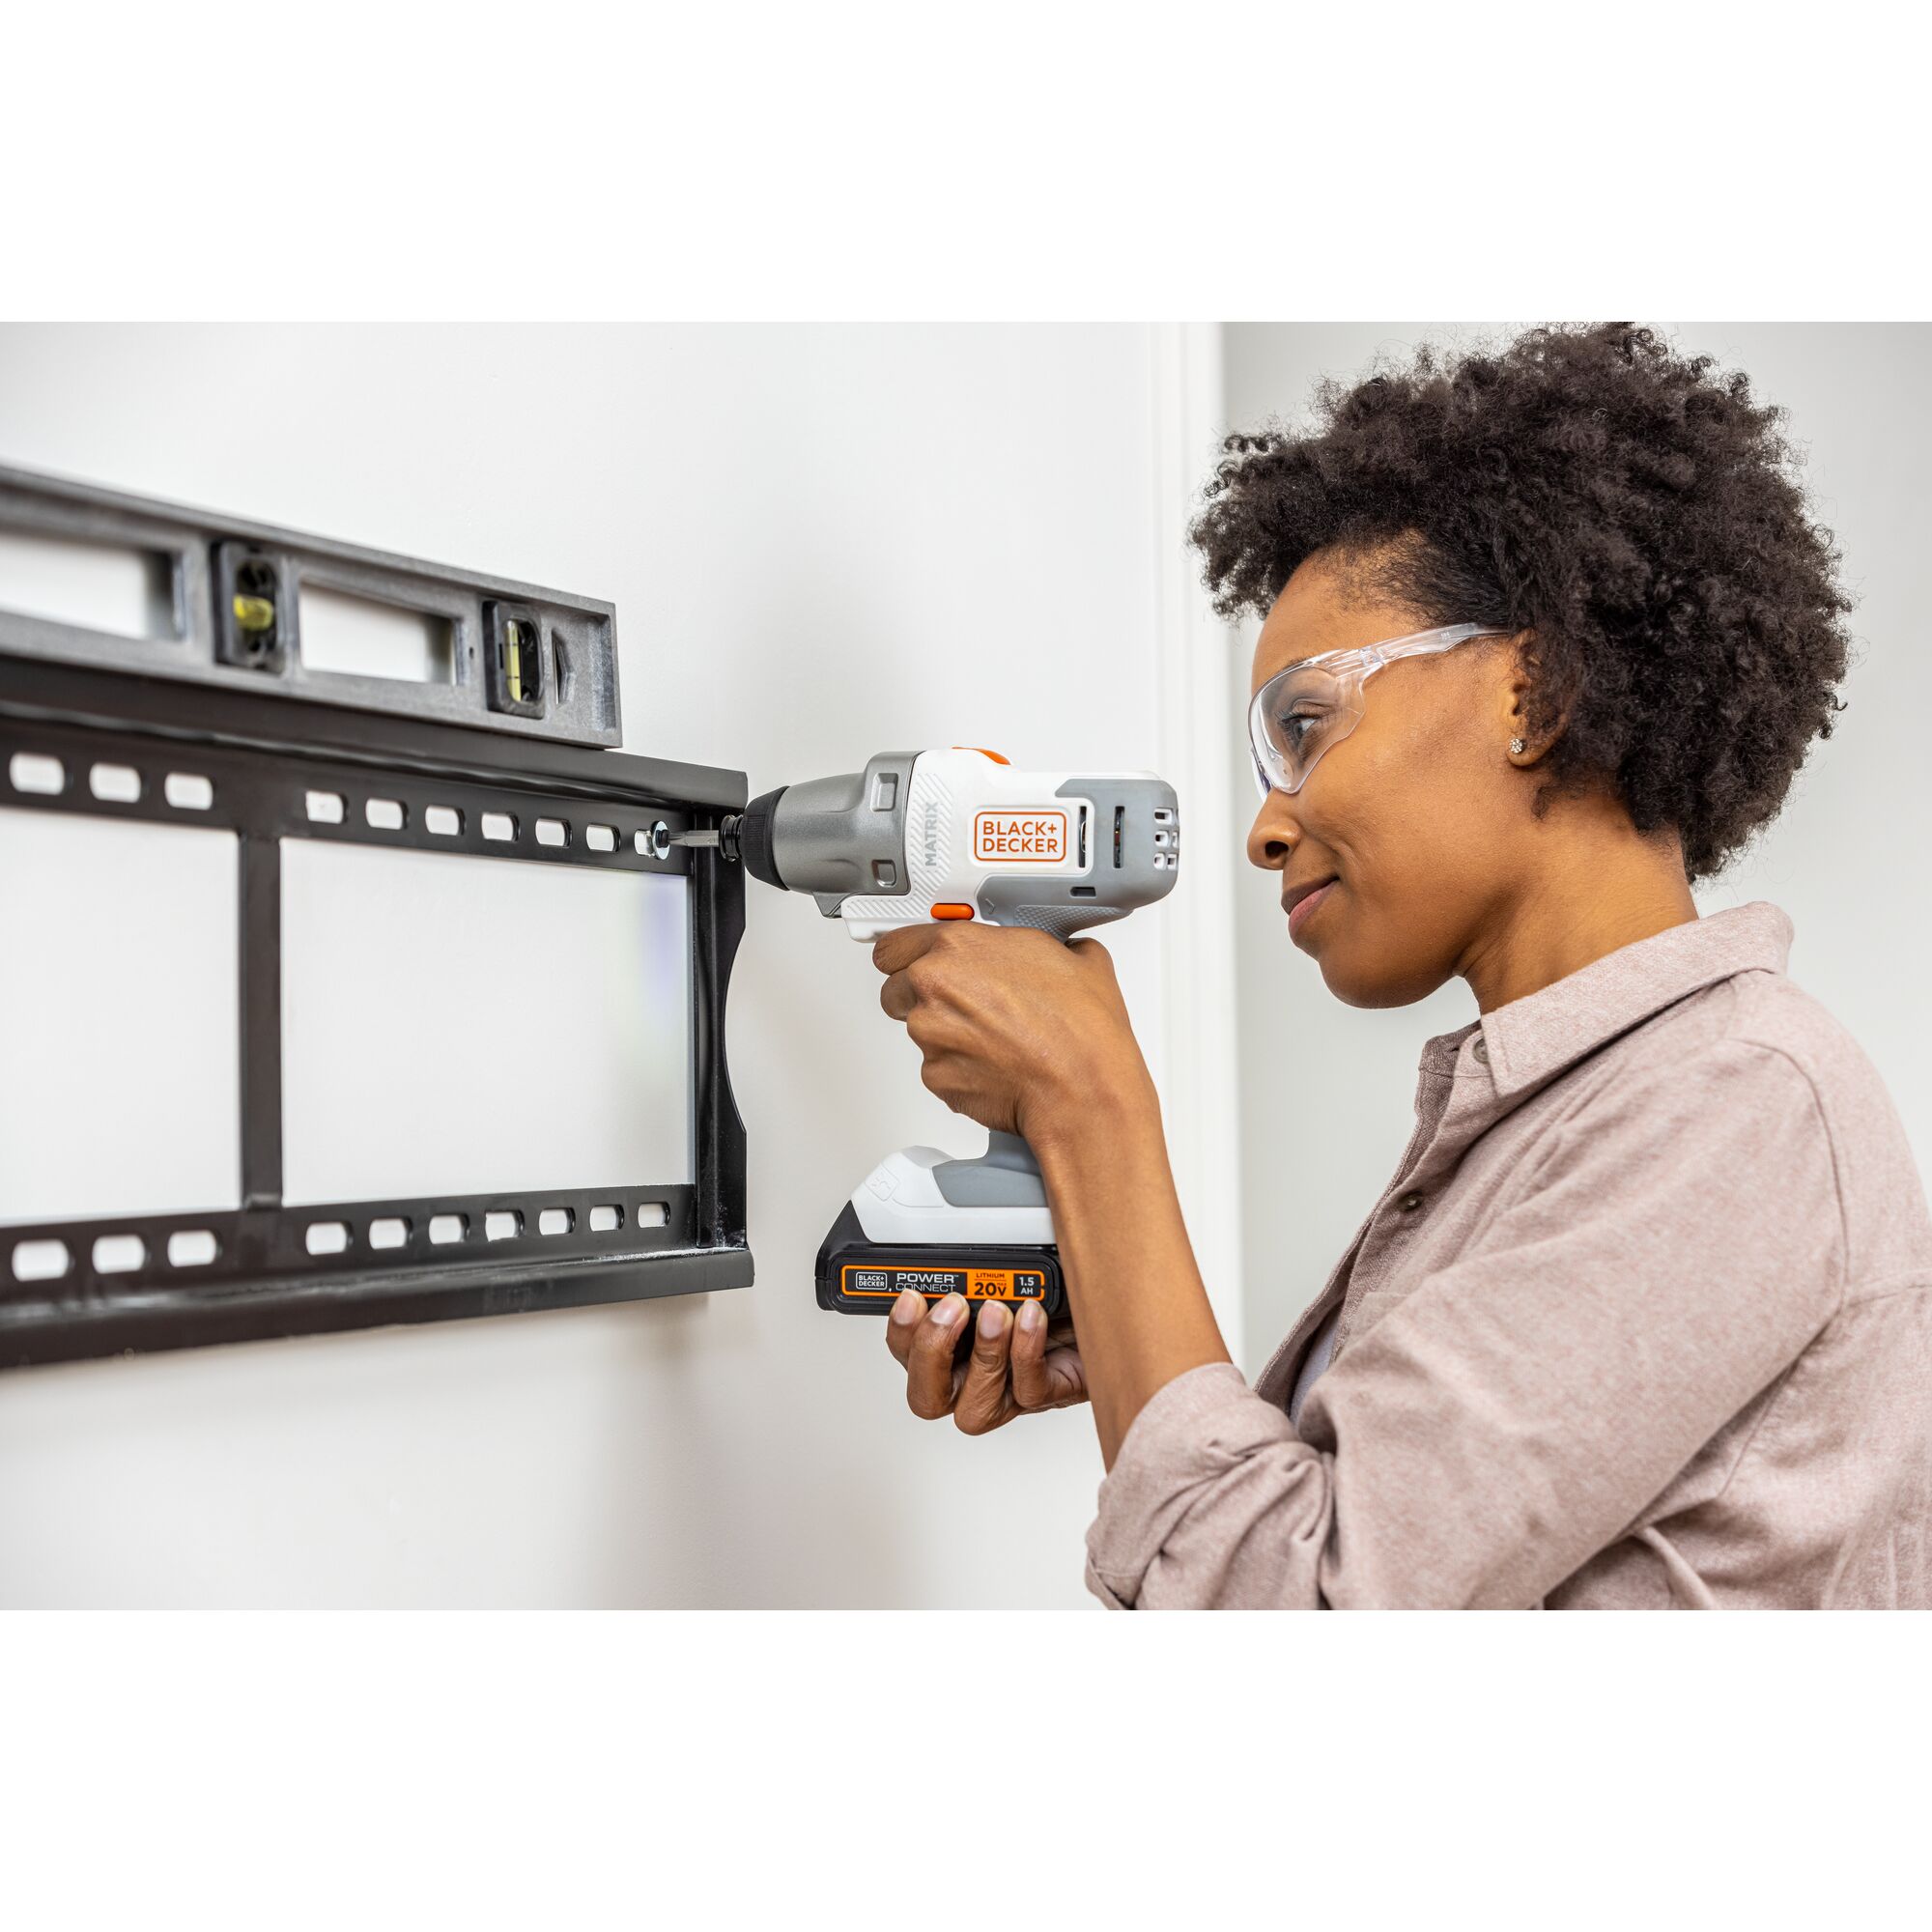 Person uses the BLACK+DECKER MATRIX impact driver attachment to fasten a lighty duty anchor in to drywall to hang a TV mount